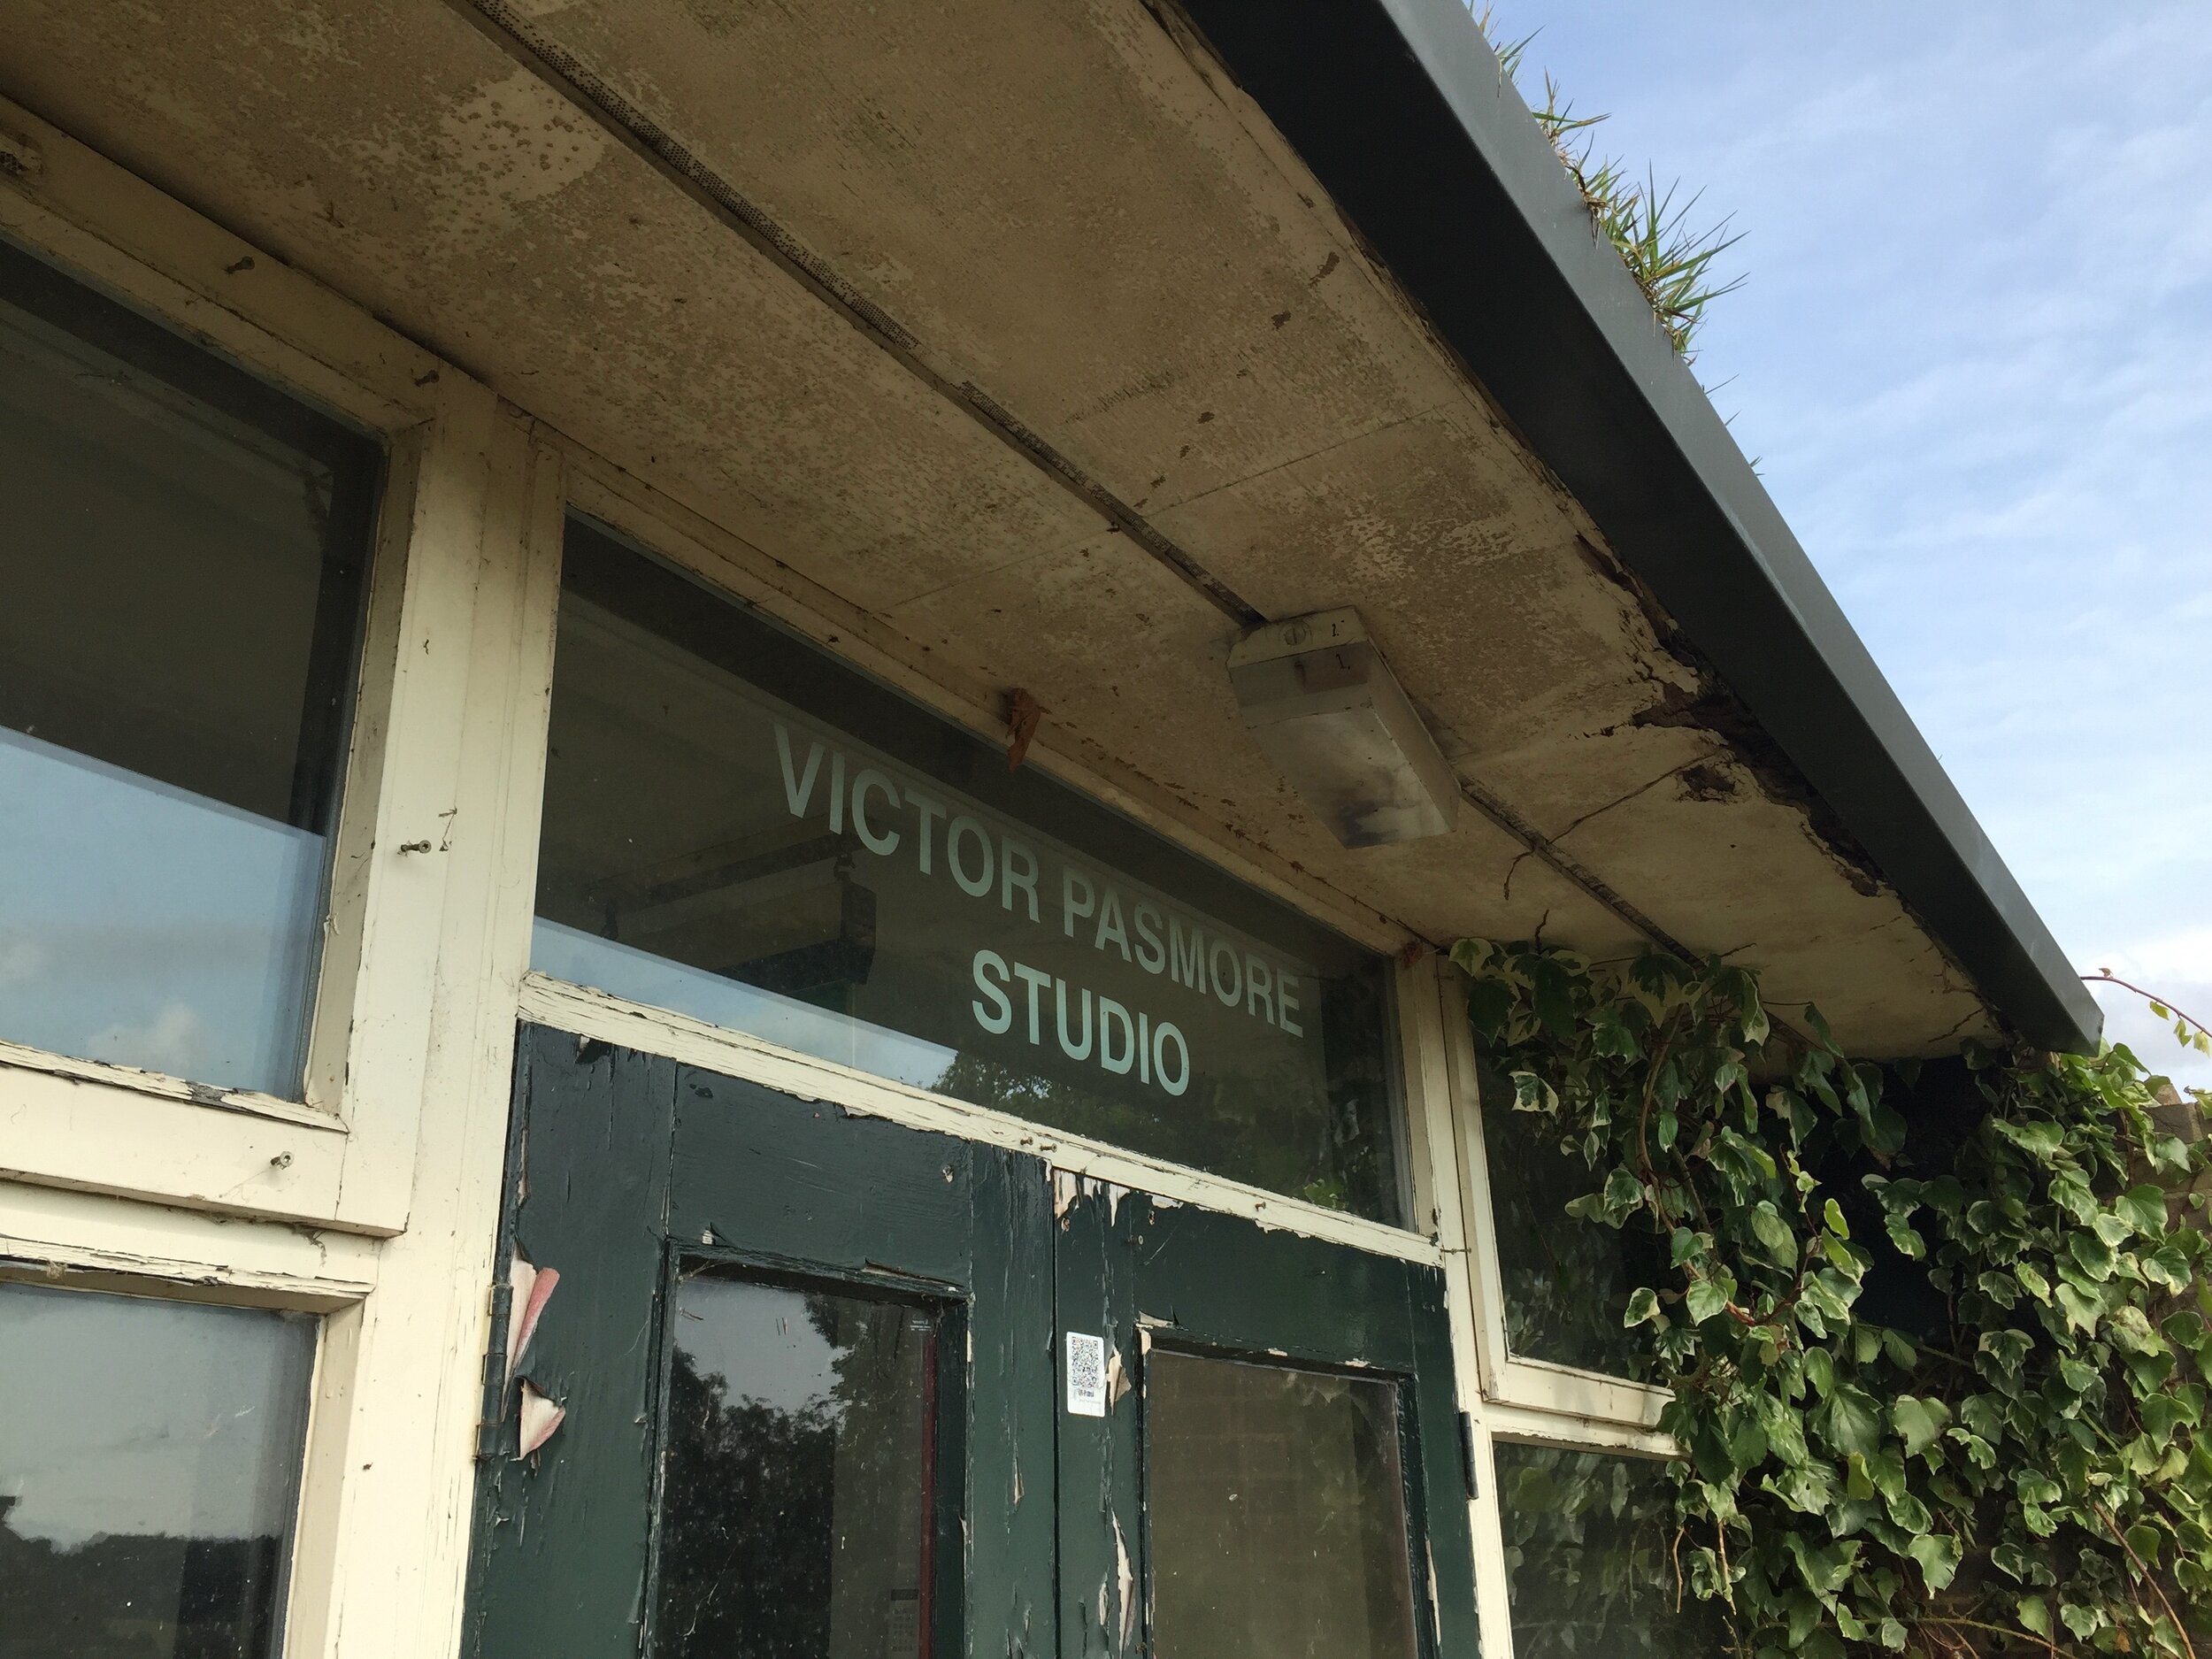  The studio was opened by the artist Victor Pasmore himself in 1993. 